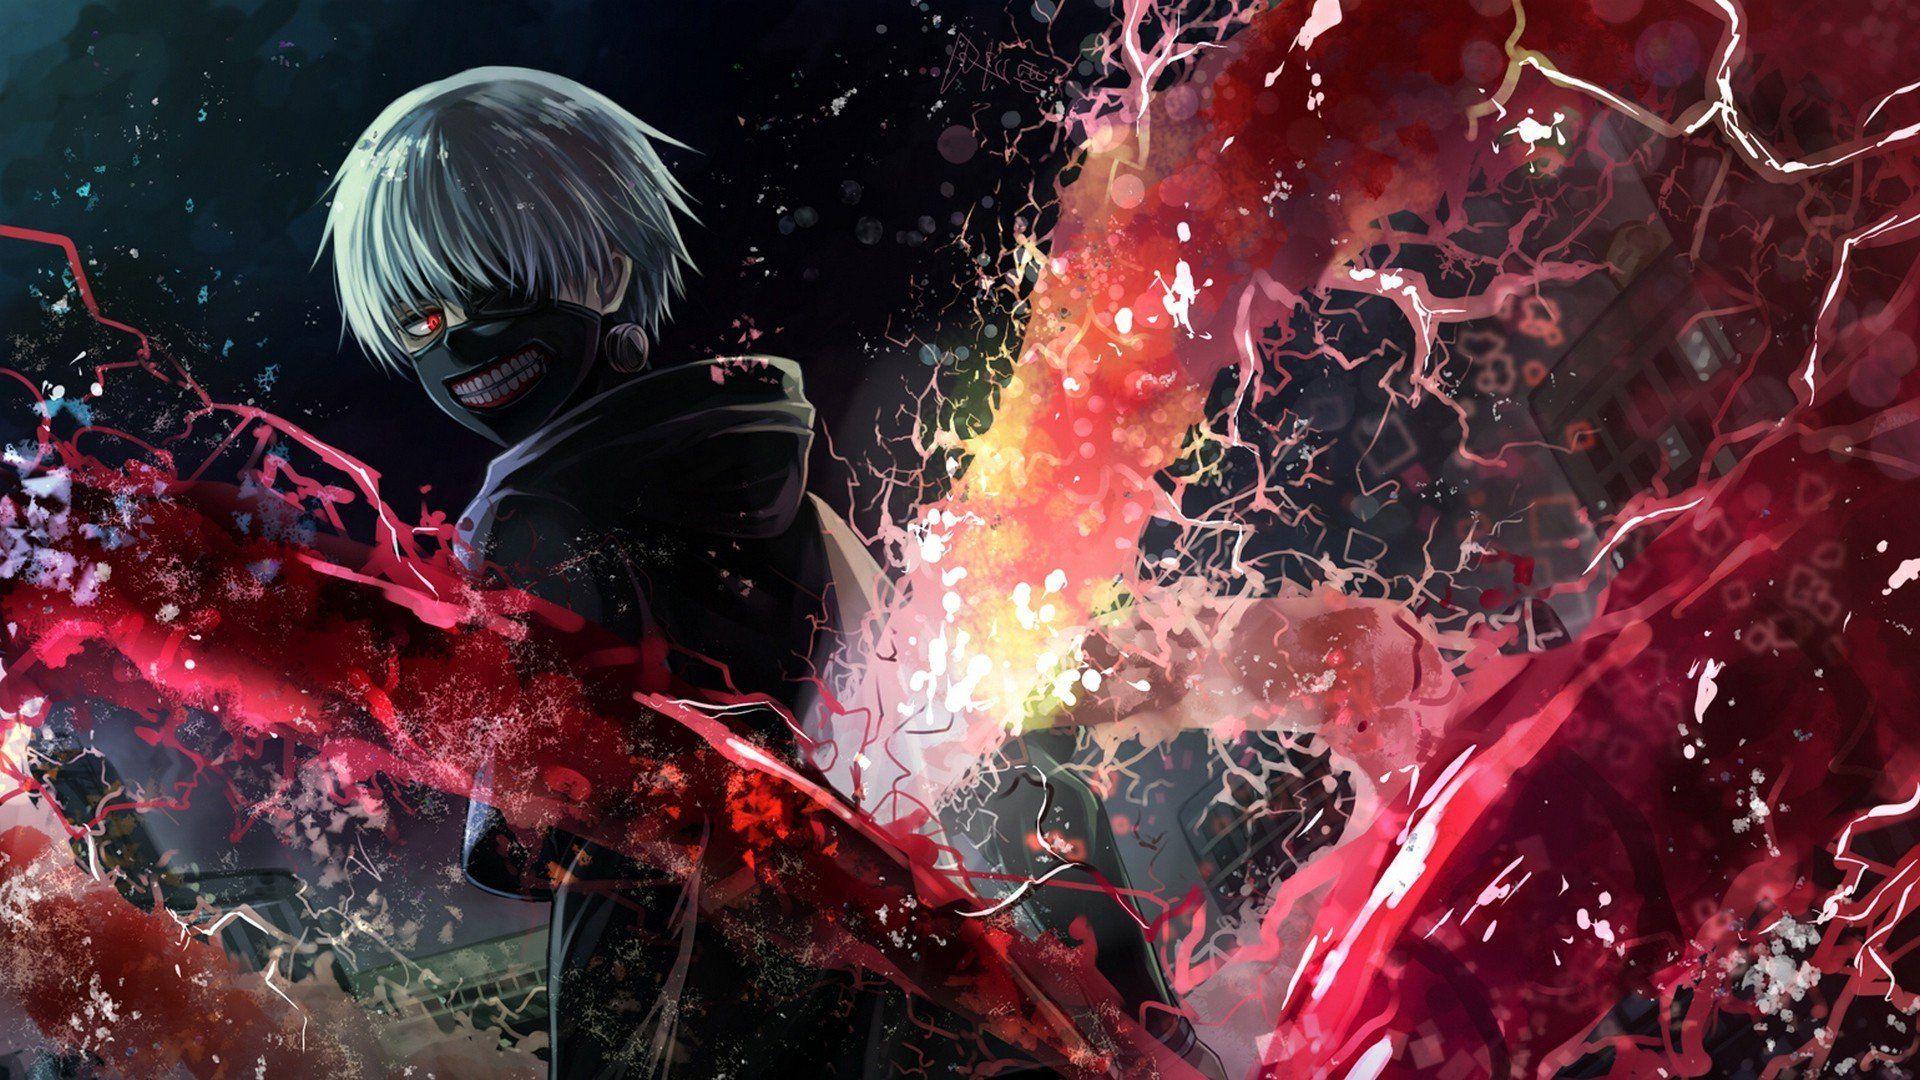 Tokyo Ghoul Art, HD Anime, 4k Wallpapers, Image, Backgrounds